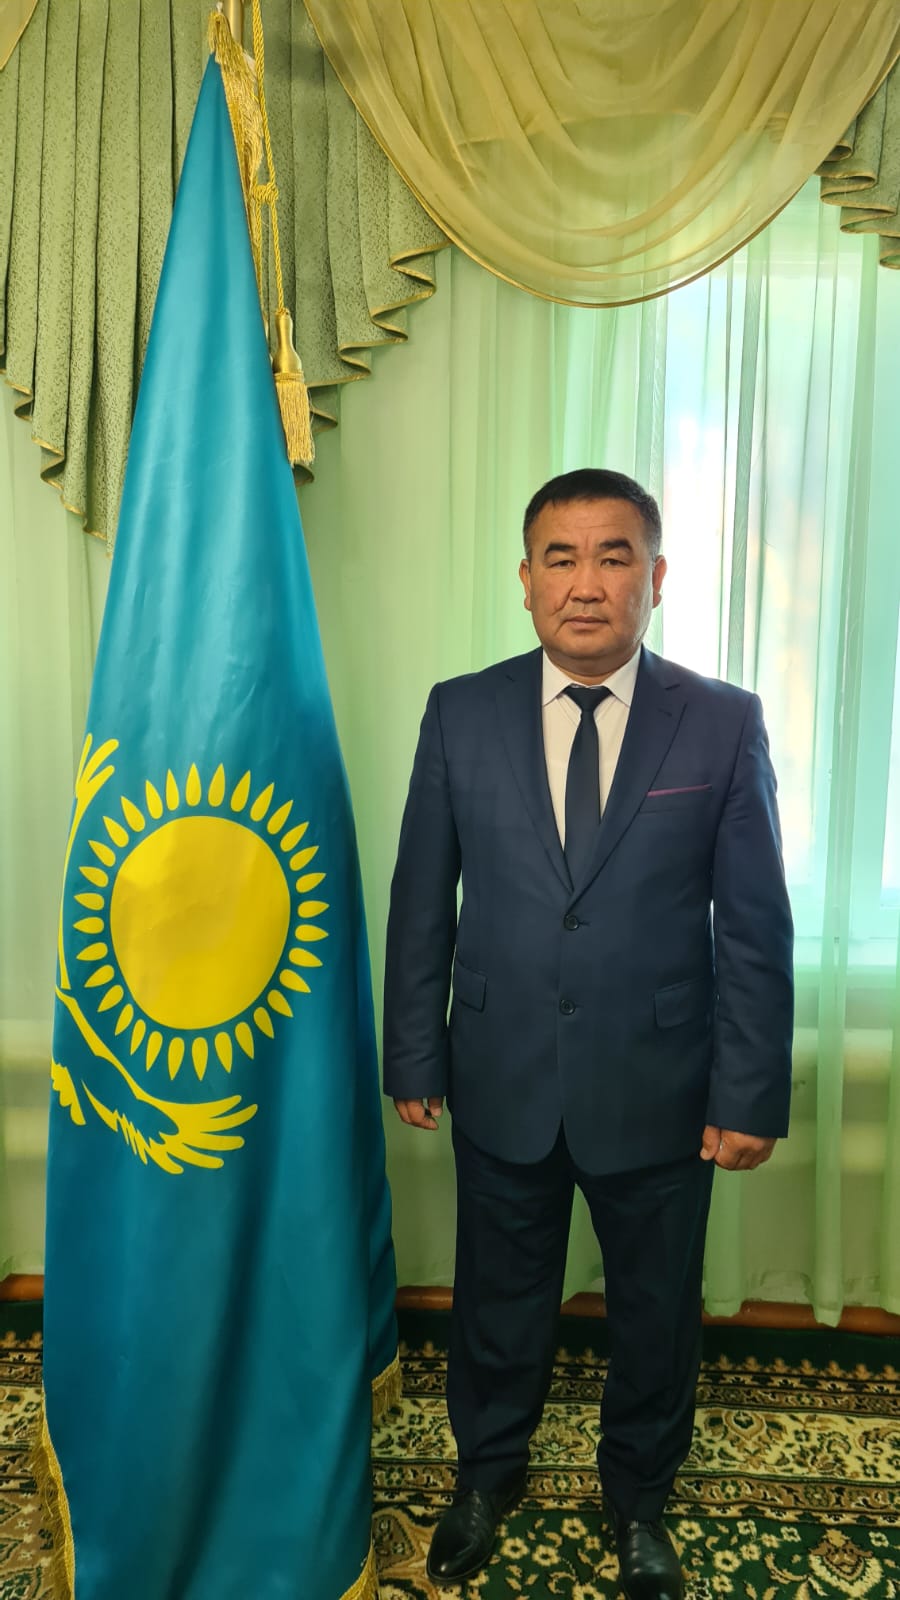 Dear villagers!I sincerely congratulate you on May 1 – the holiday of unity of the peoples of Kazakhstan